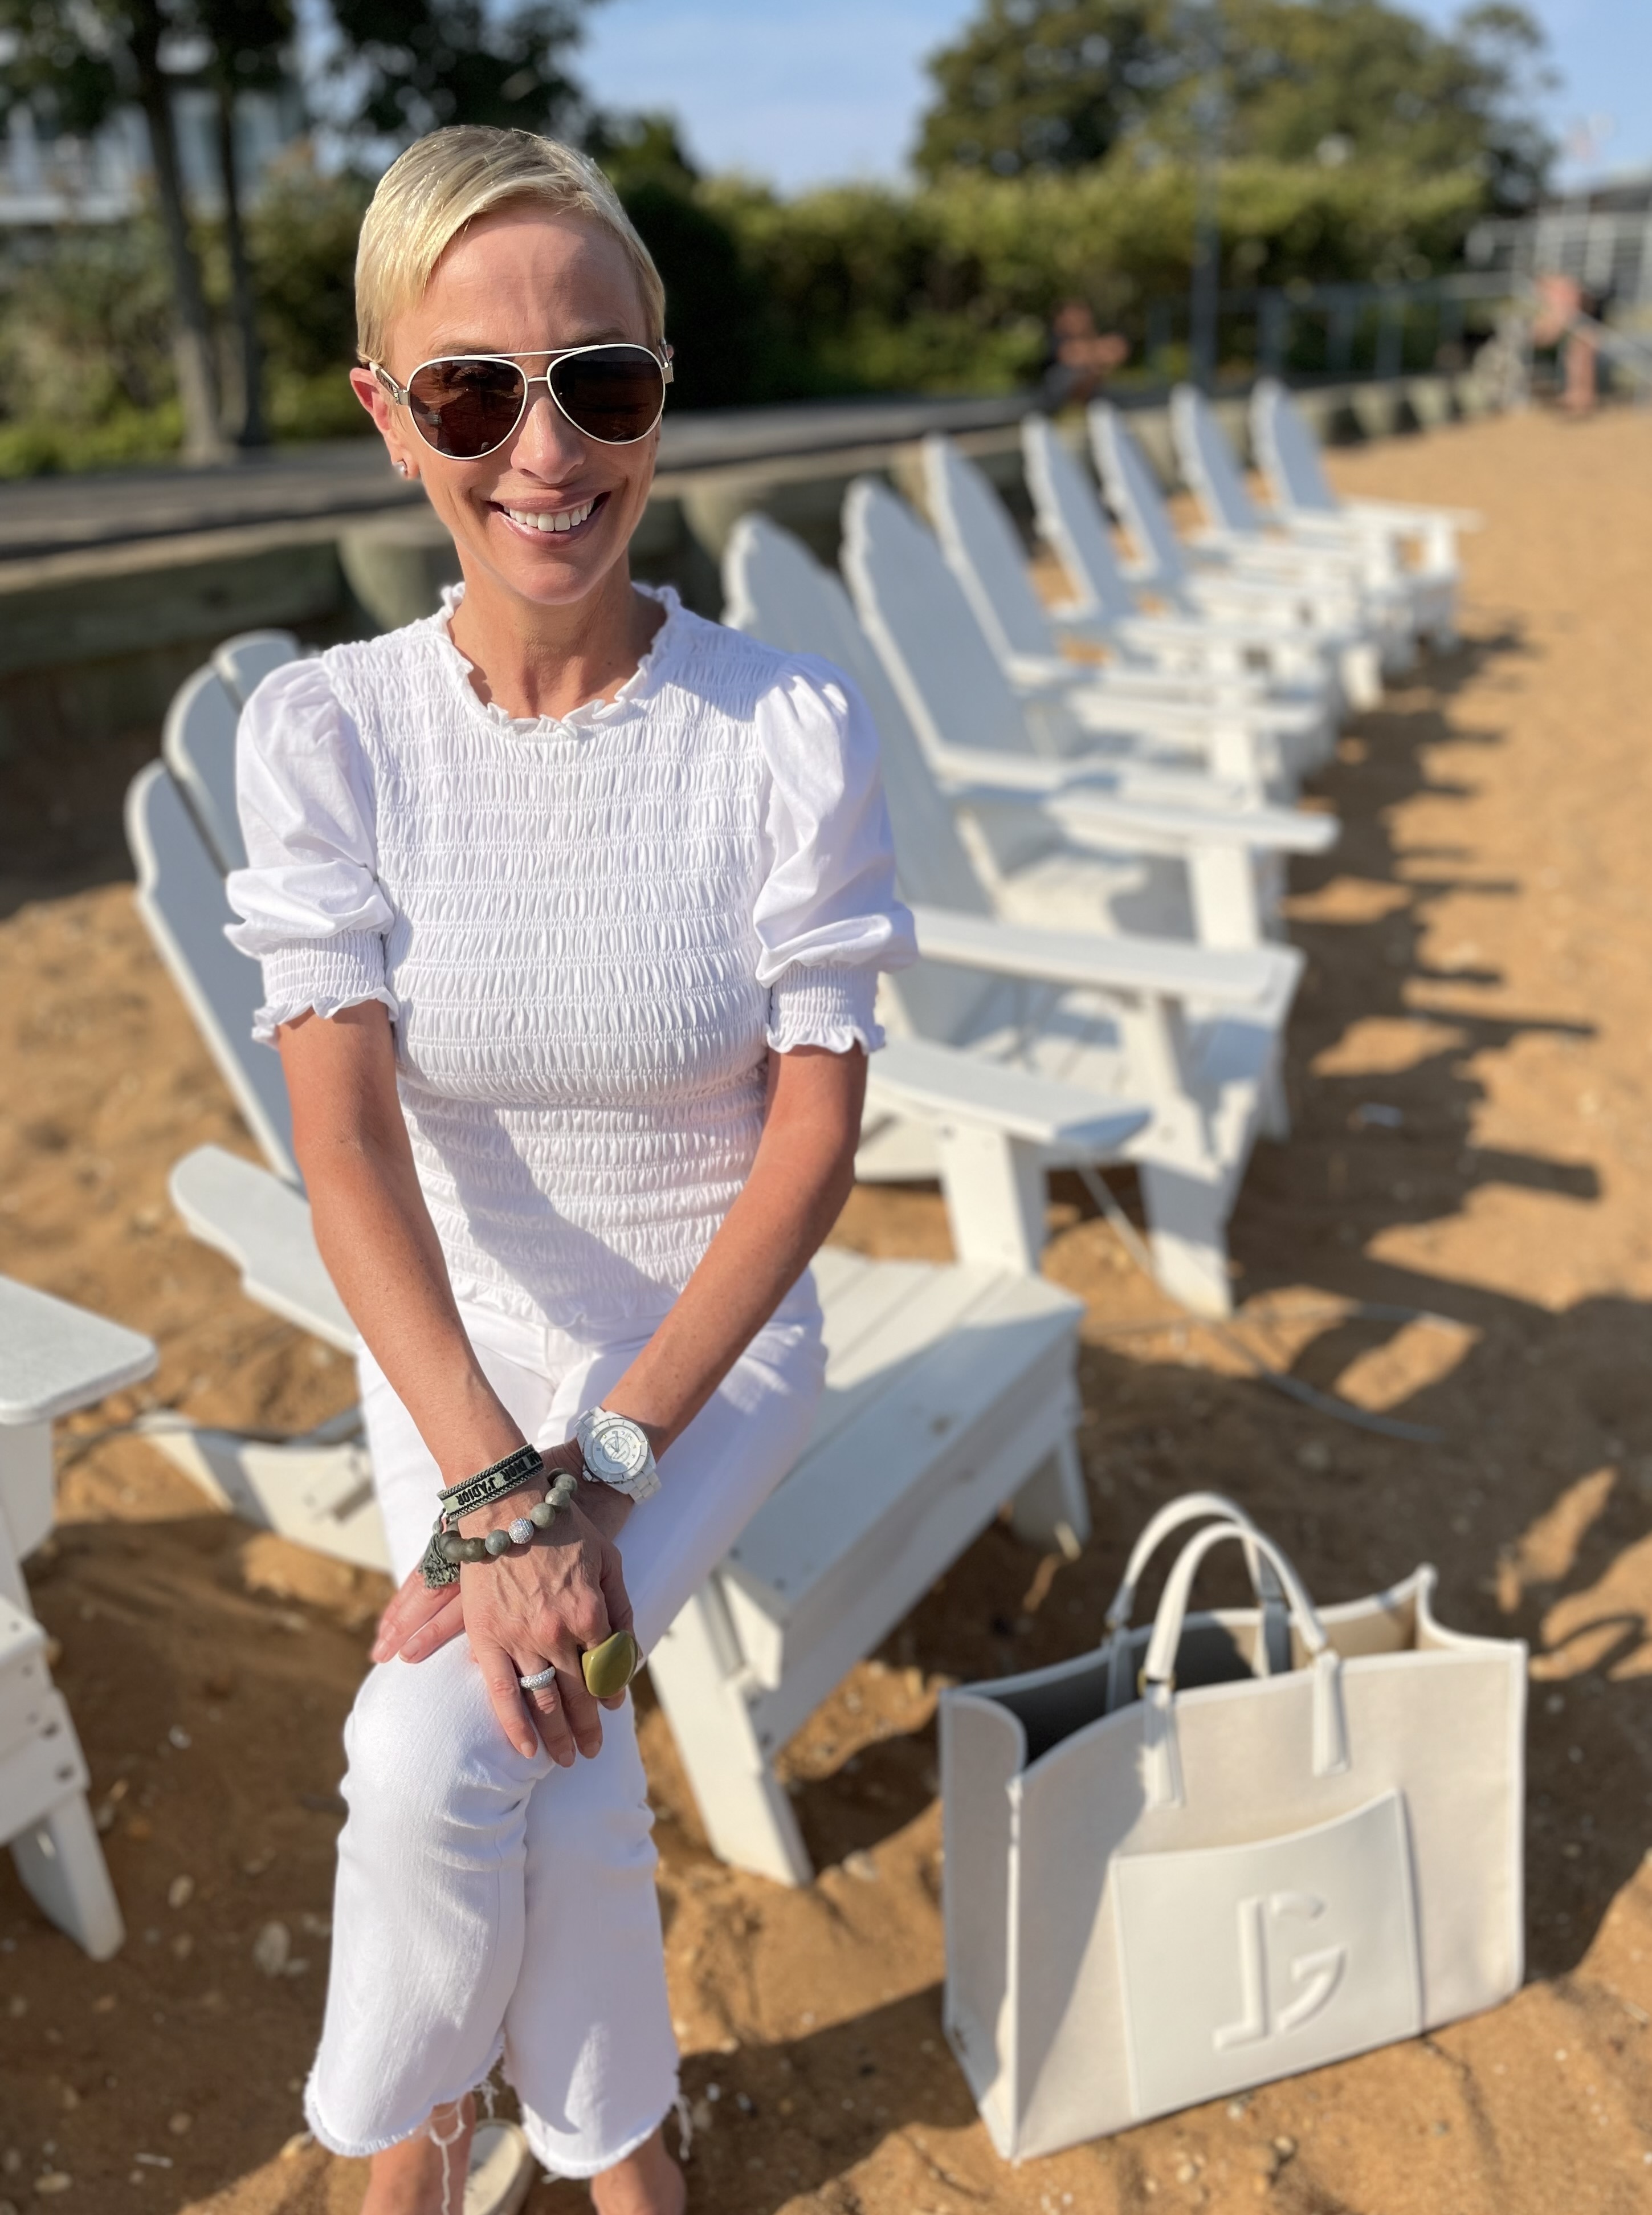 Lisa in all white outfit from Veronica Beard in Southampton. Bag is “The Hampton Bag” by Gladstn London.